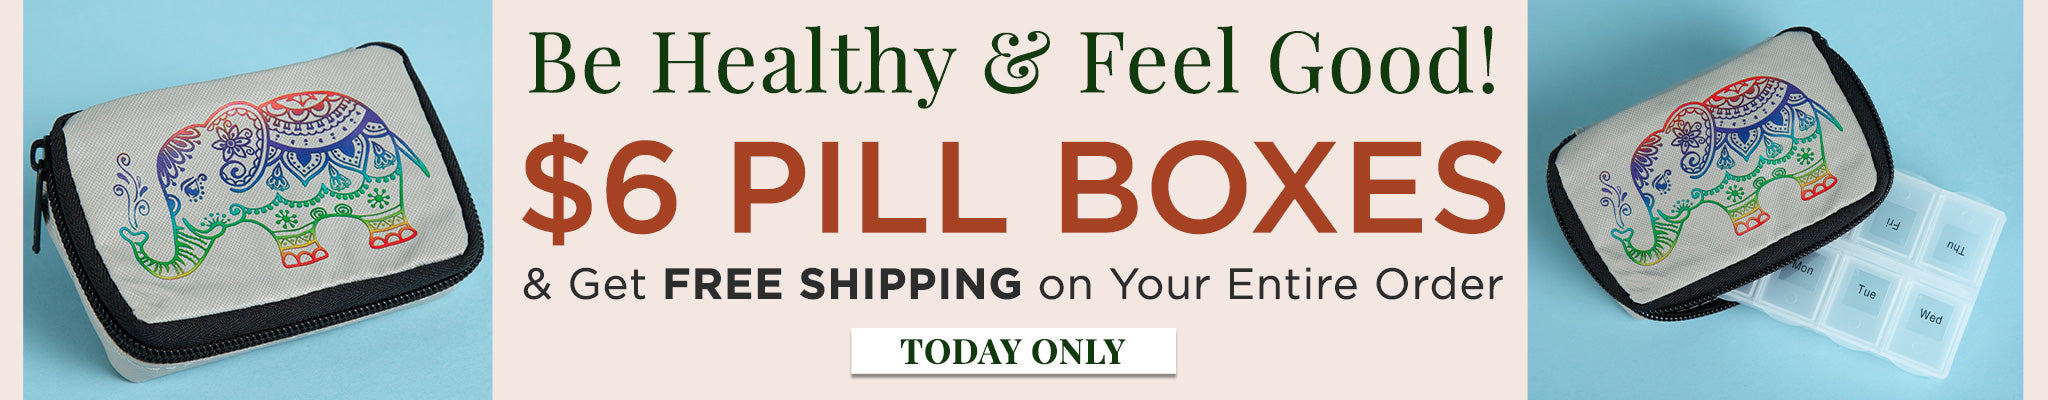 Be Healthy & Feel Good! $6 Pill Boxes & Get Free Shipping on Your Entire Order. Today Only!